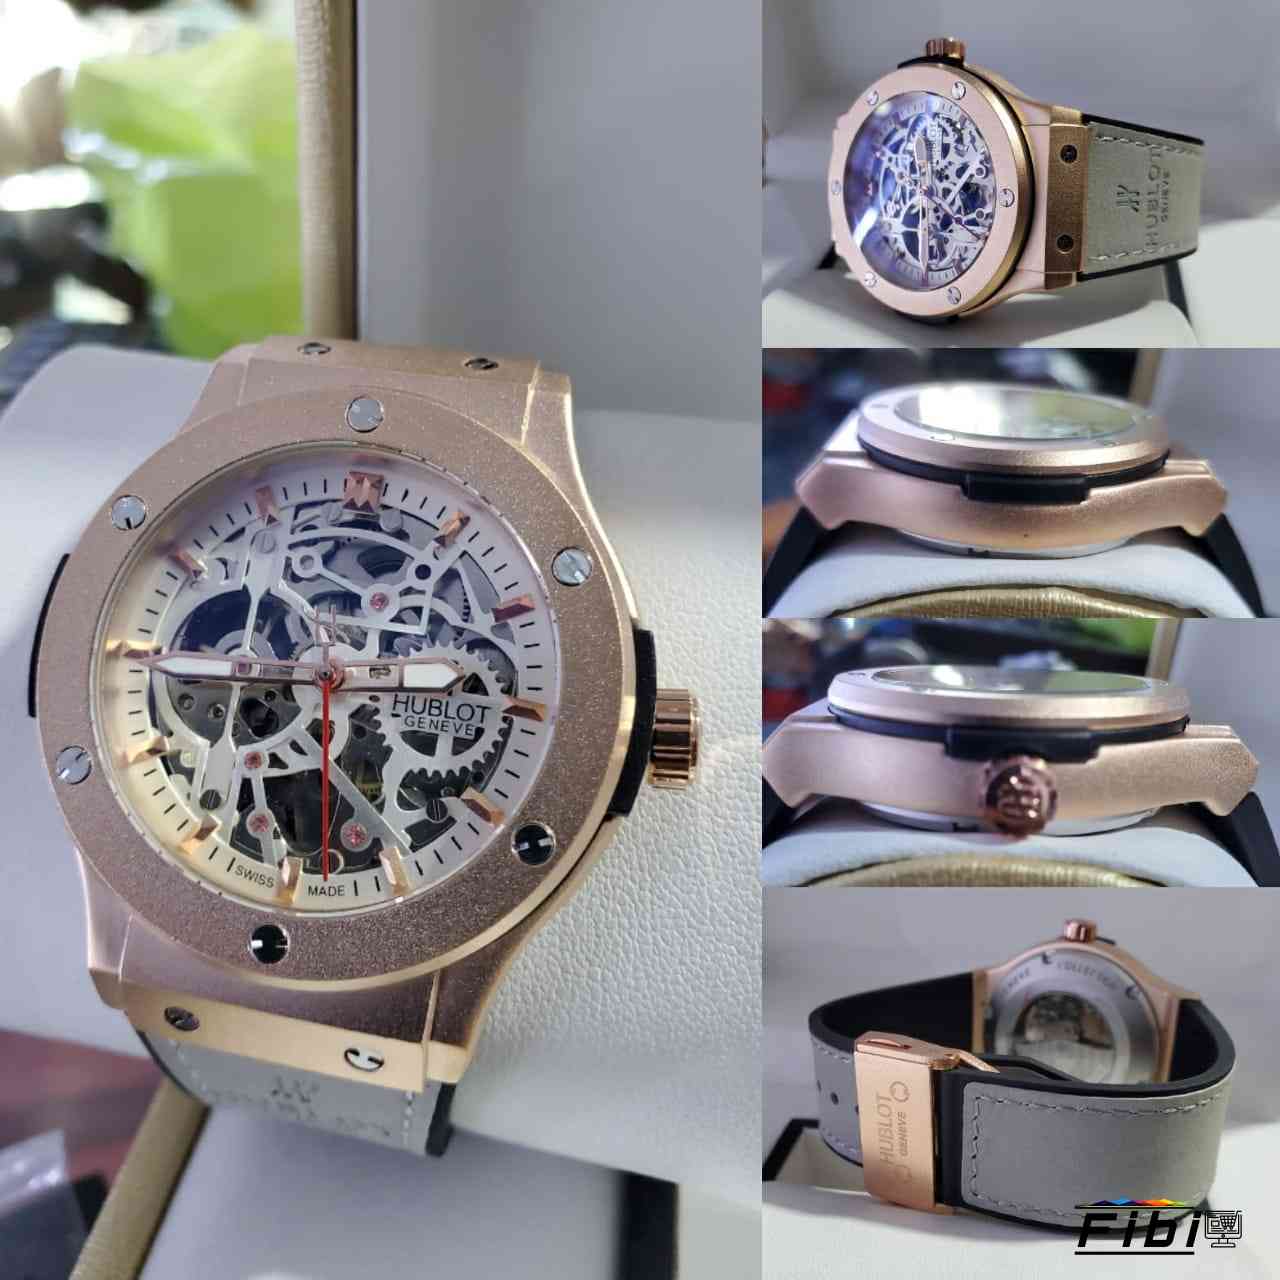 Hublot Automatic Watch ✓Chain and Belt ✓#Imported_Watches ✓Cash on Delivery  (Inside Dhaka City)🛵 ✓We deliver all over 🇧🇩Bangladesh 🚛 ✓PLEASE INBOX  FOR, By SuperTrend Bd